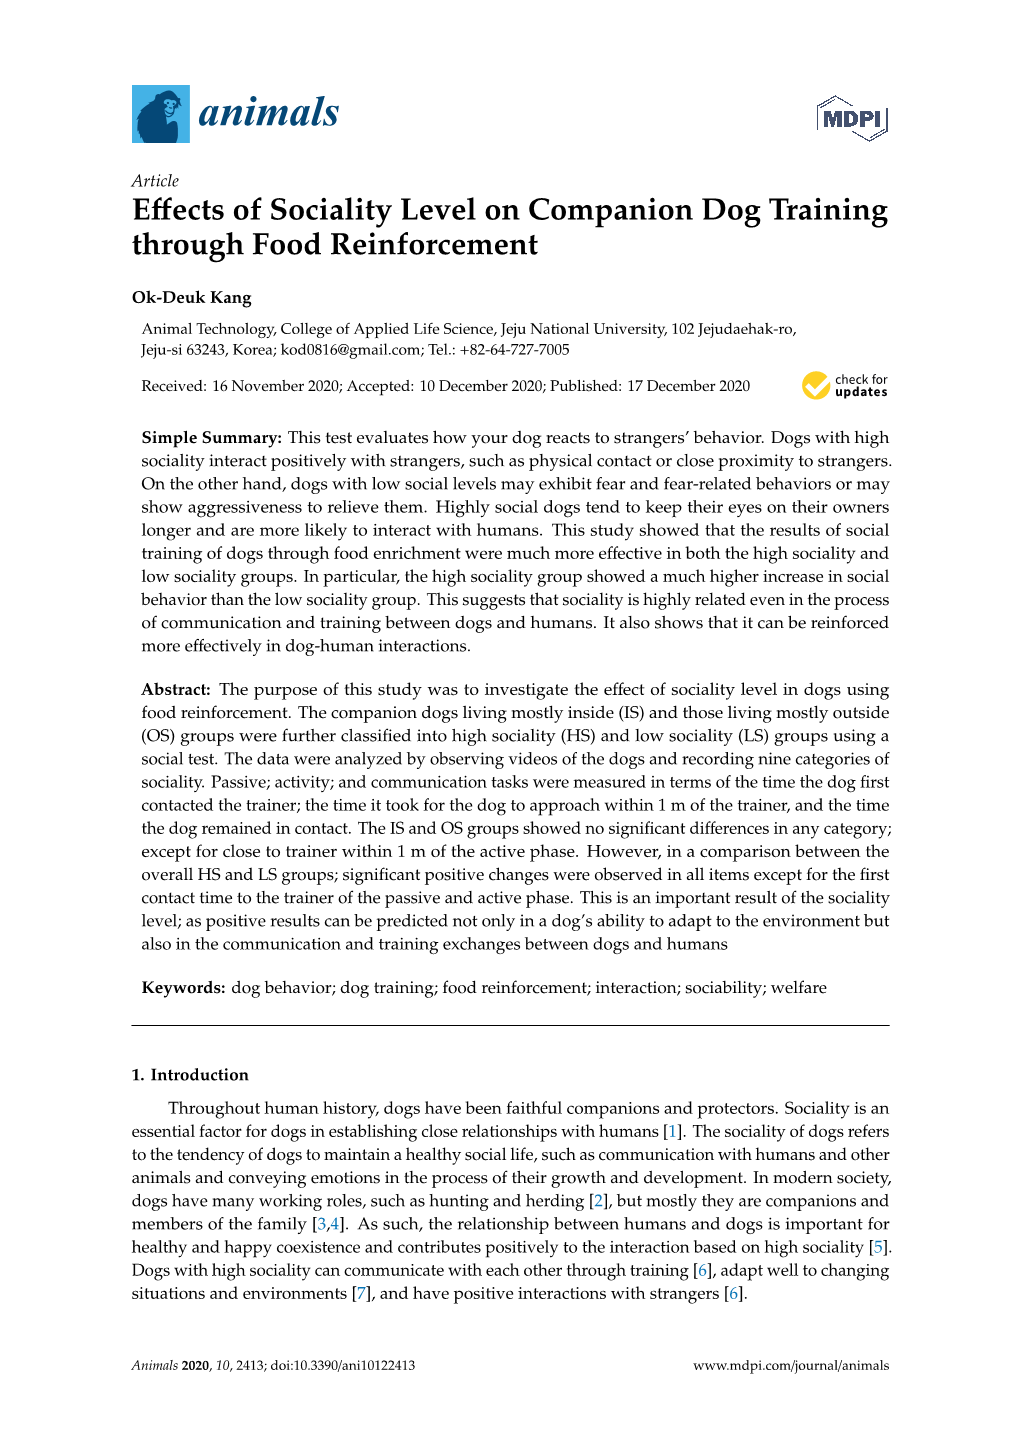 Effects of Sociality Level on Companion Dog Training Through Food Reinforcement